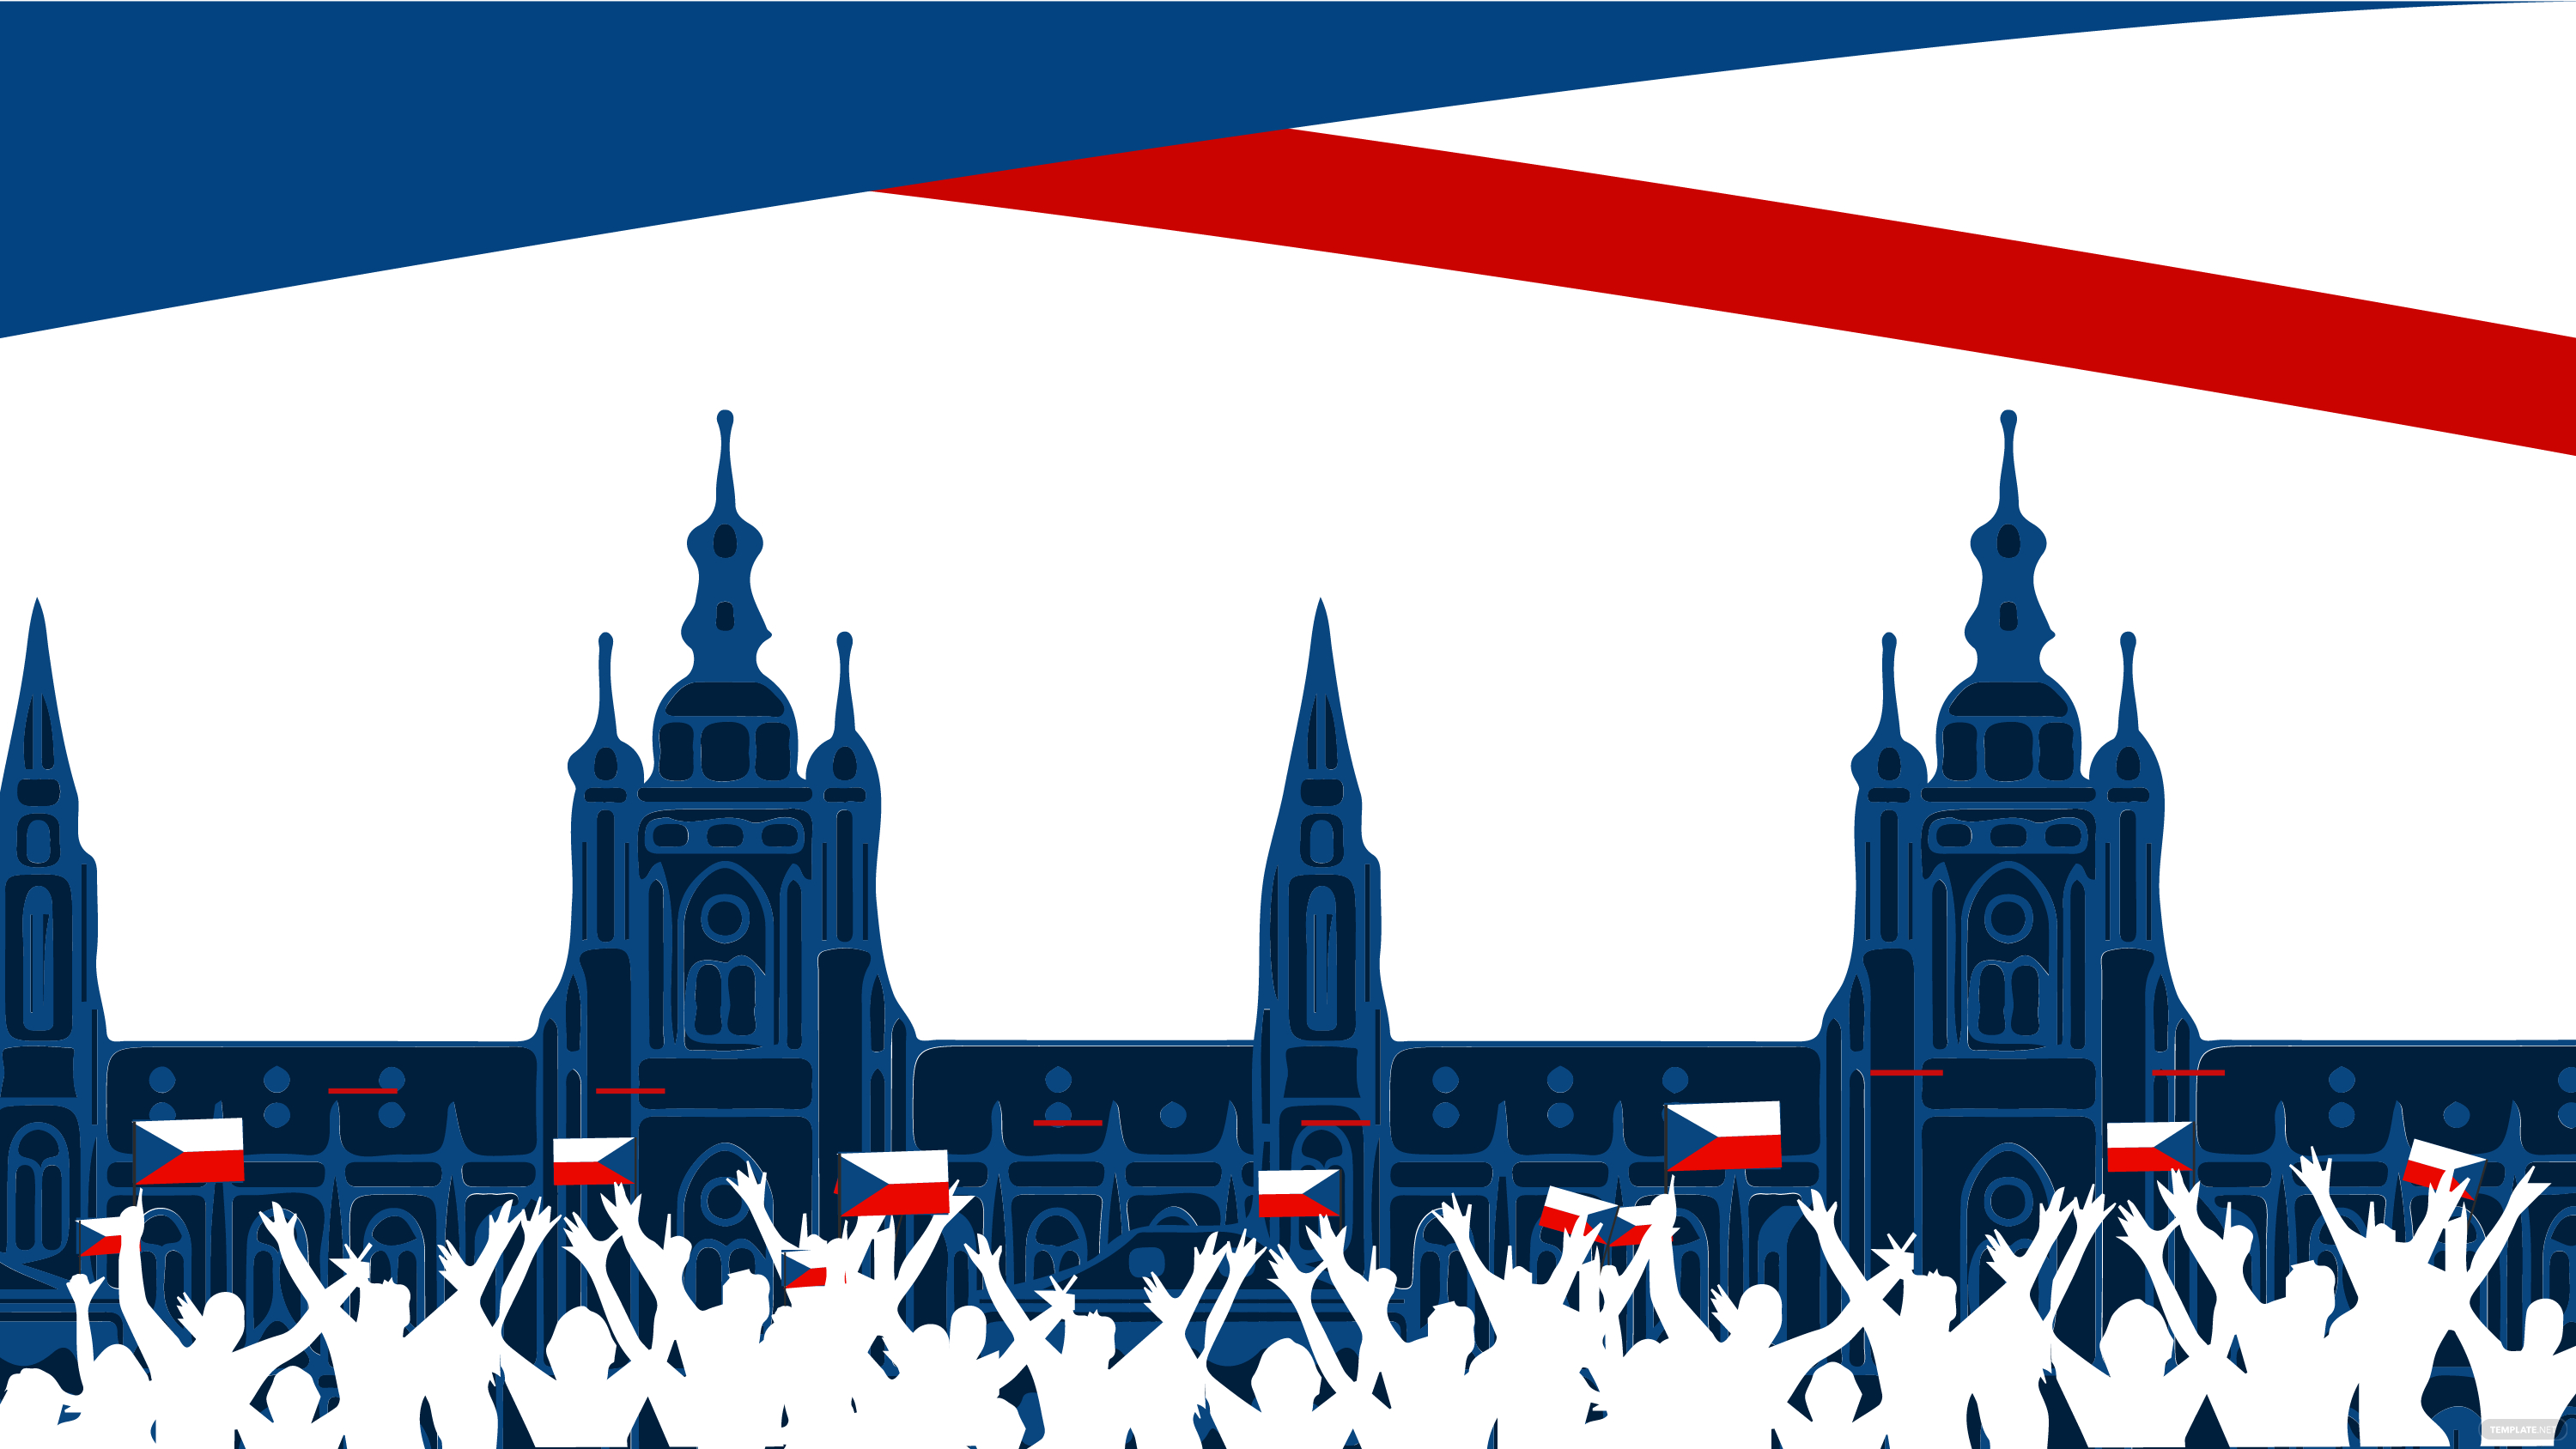 czech founding day drawing background ideas examples